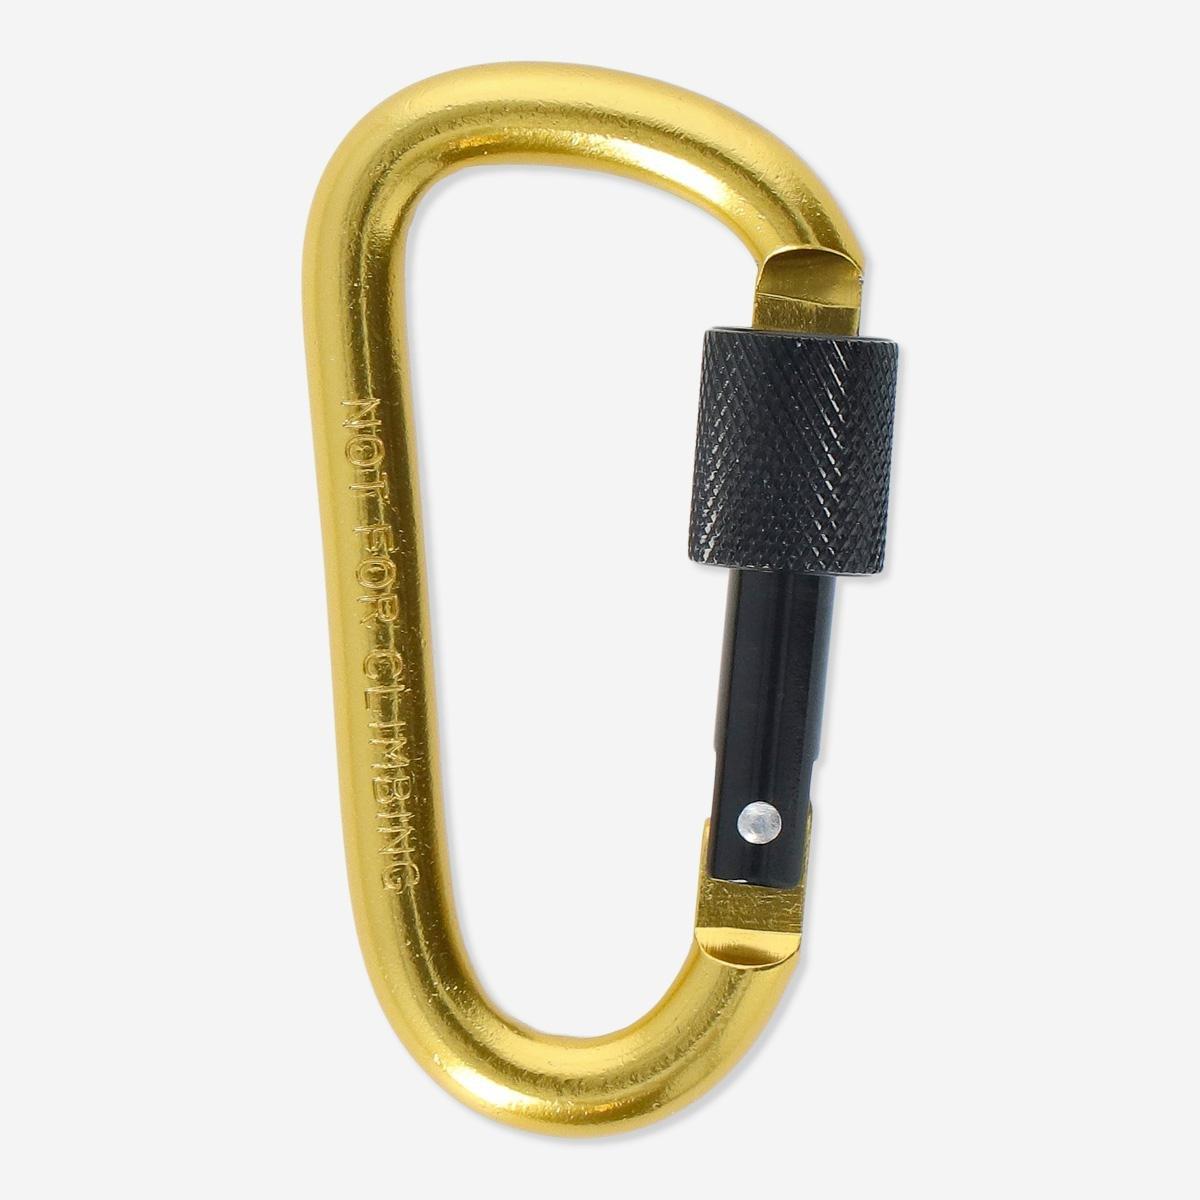 Gold Carabiner With Screw Lock